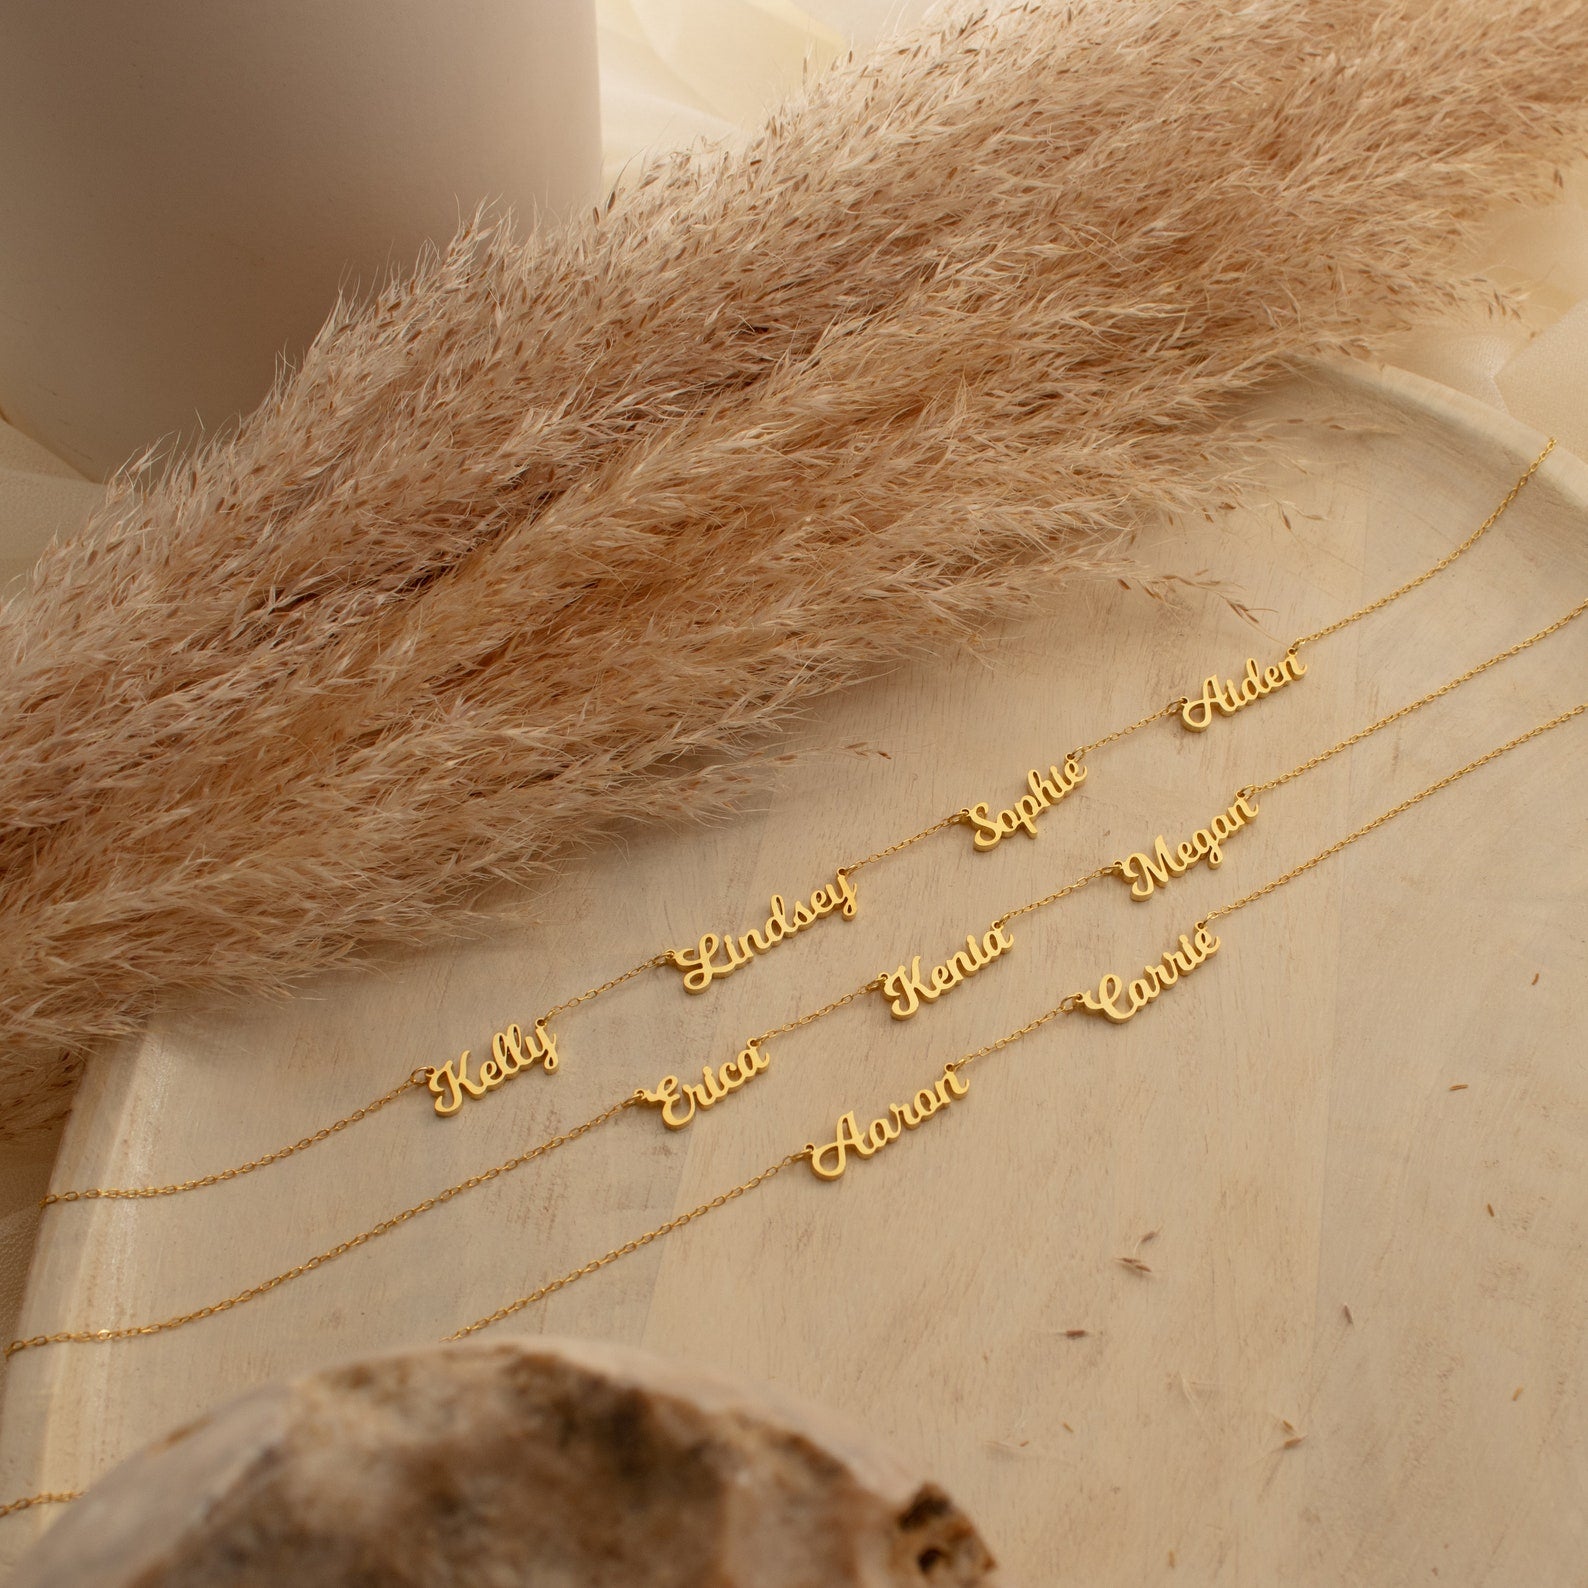 Mellow Multiple Name Necklace